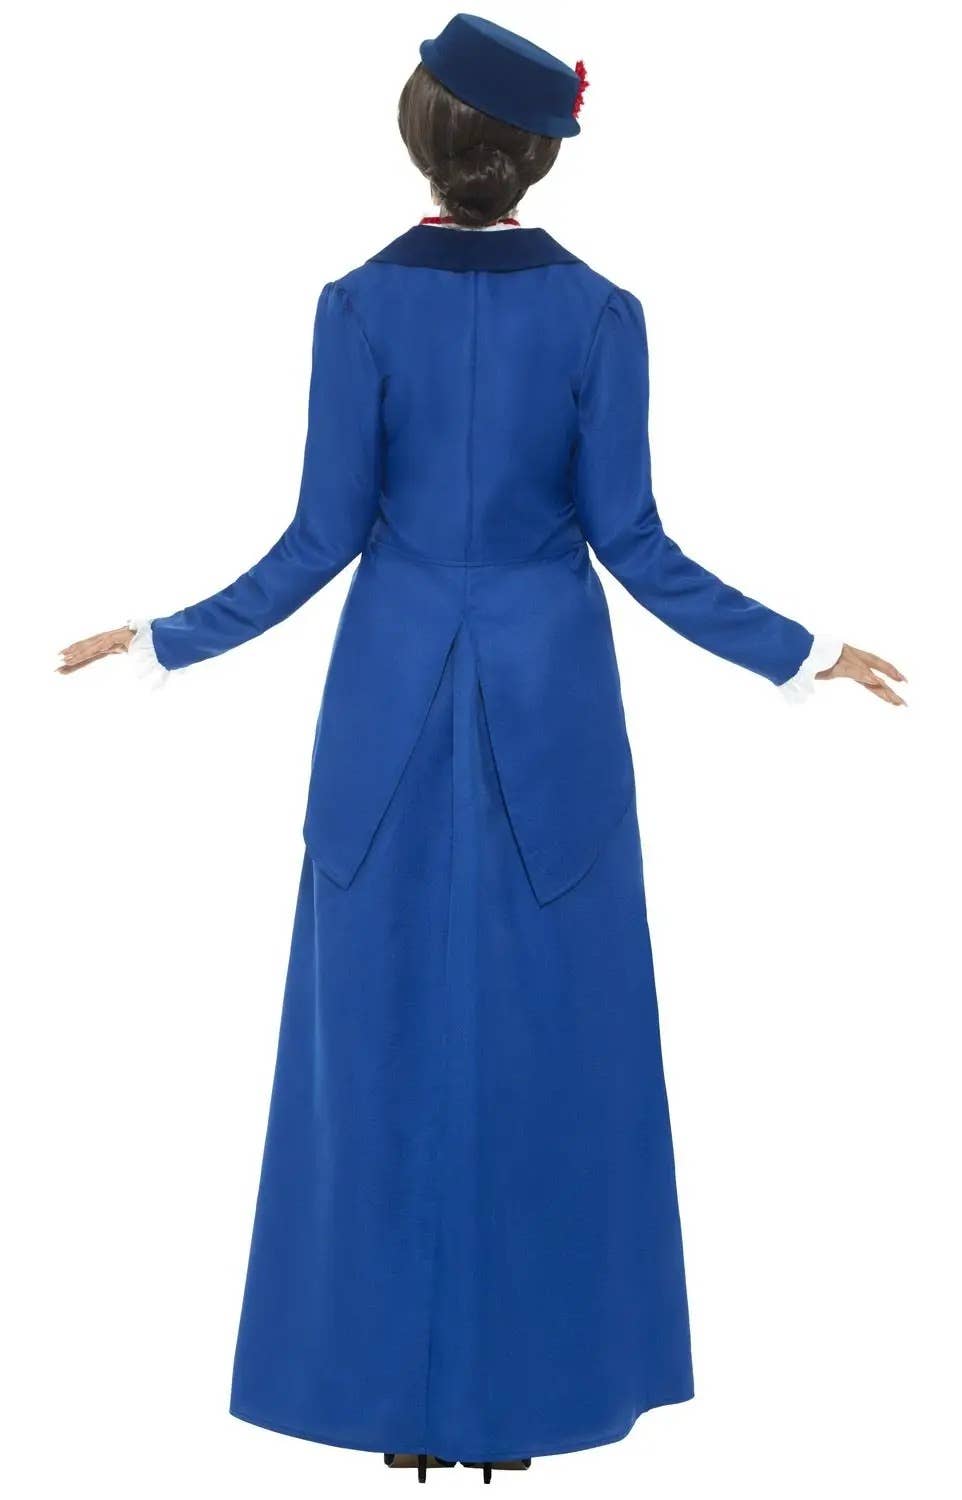 Image of Victorian Nanny Women's Plus Size Mary Poppins Costume - Back View